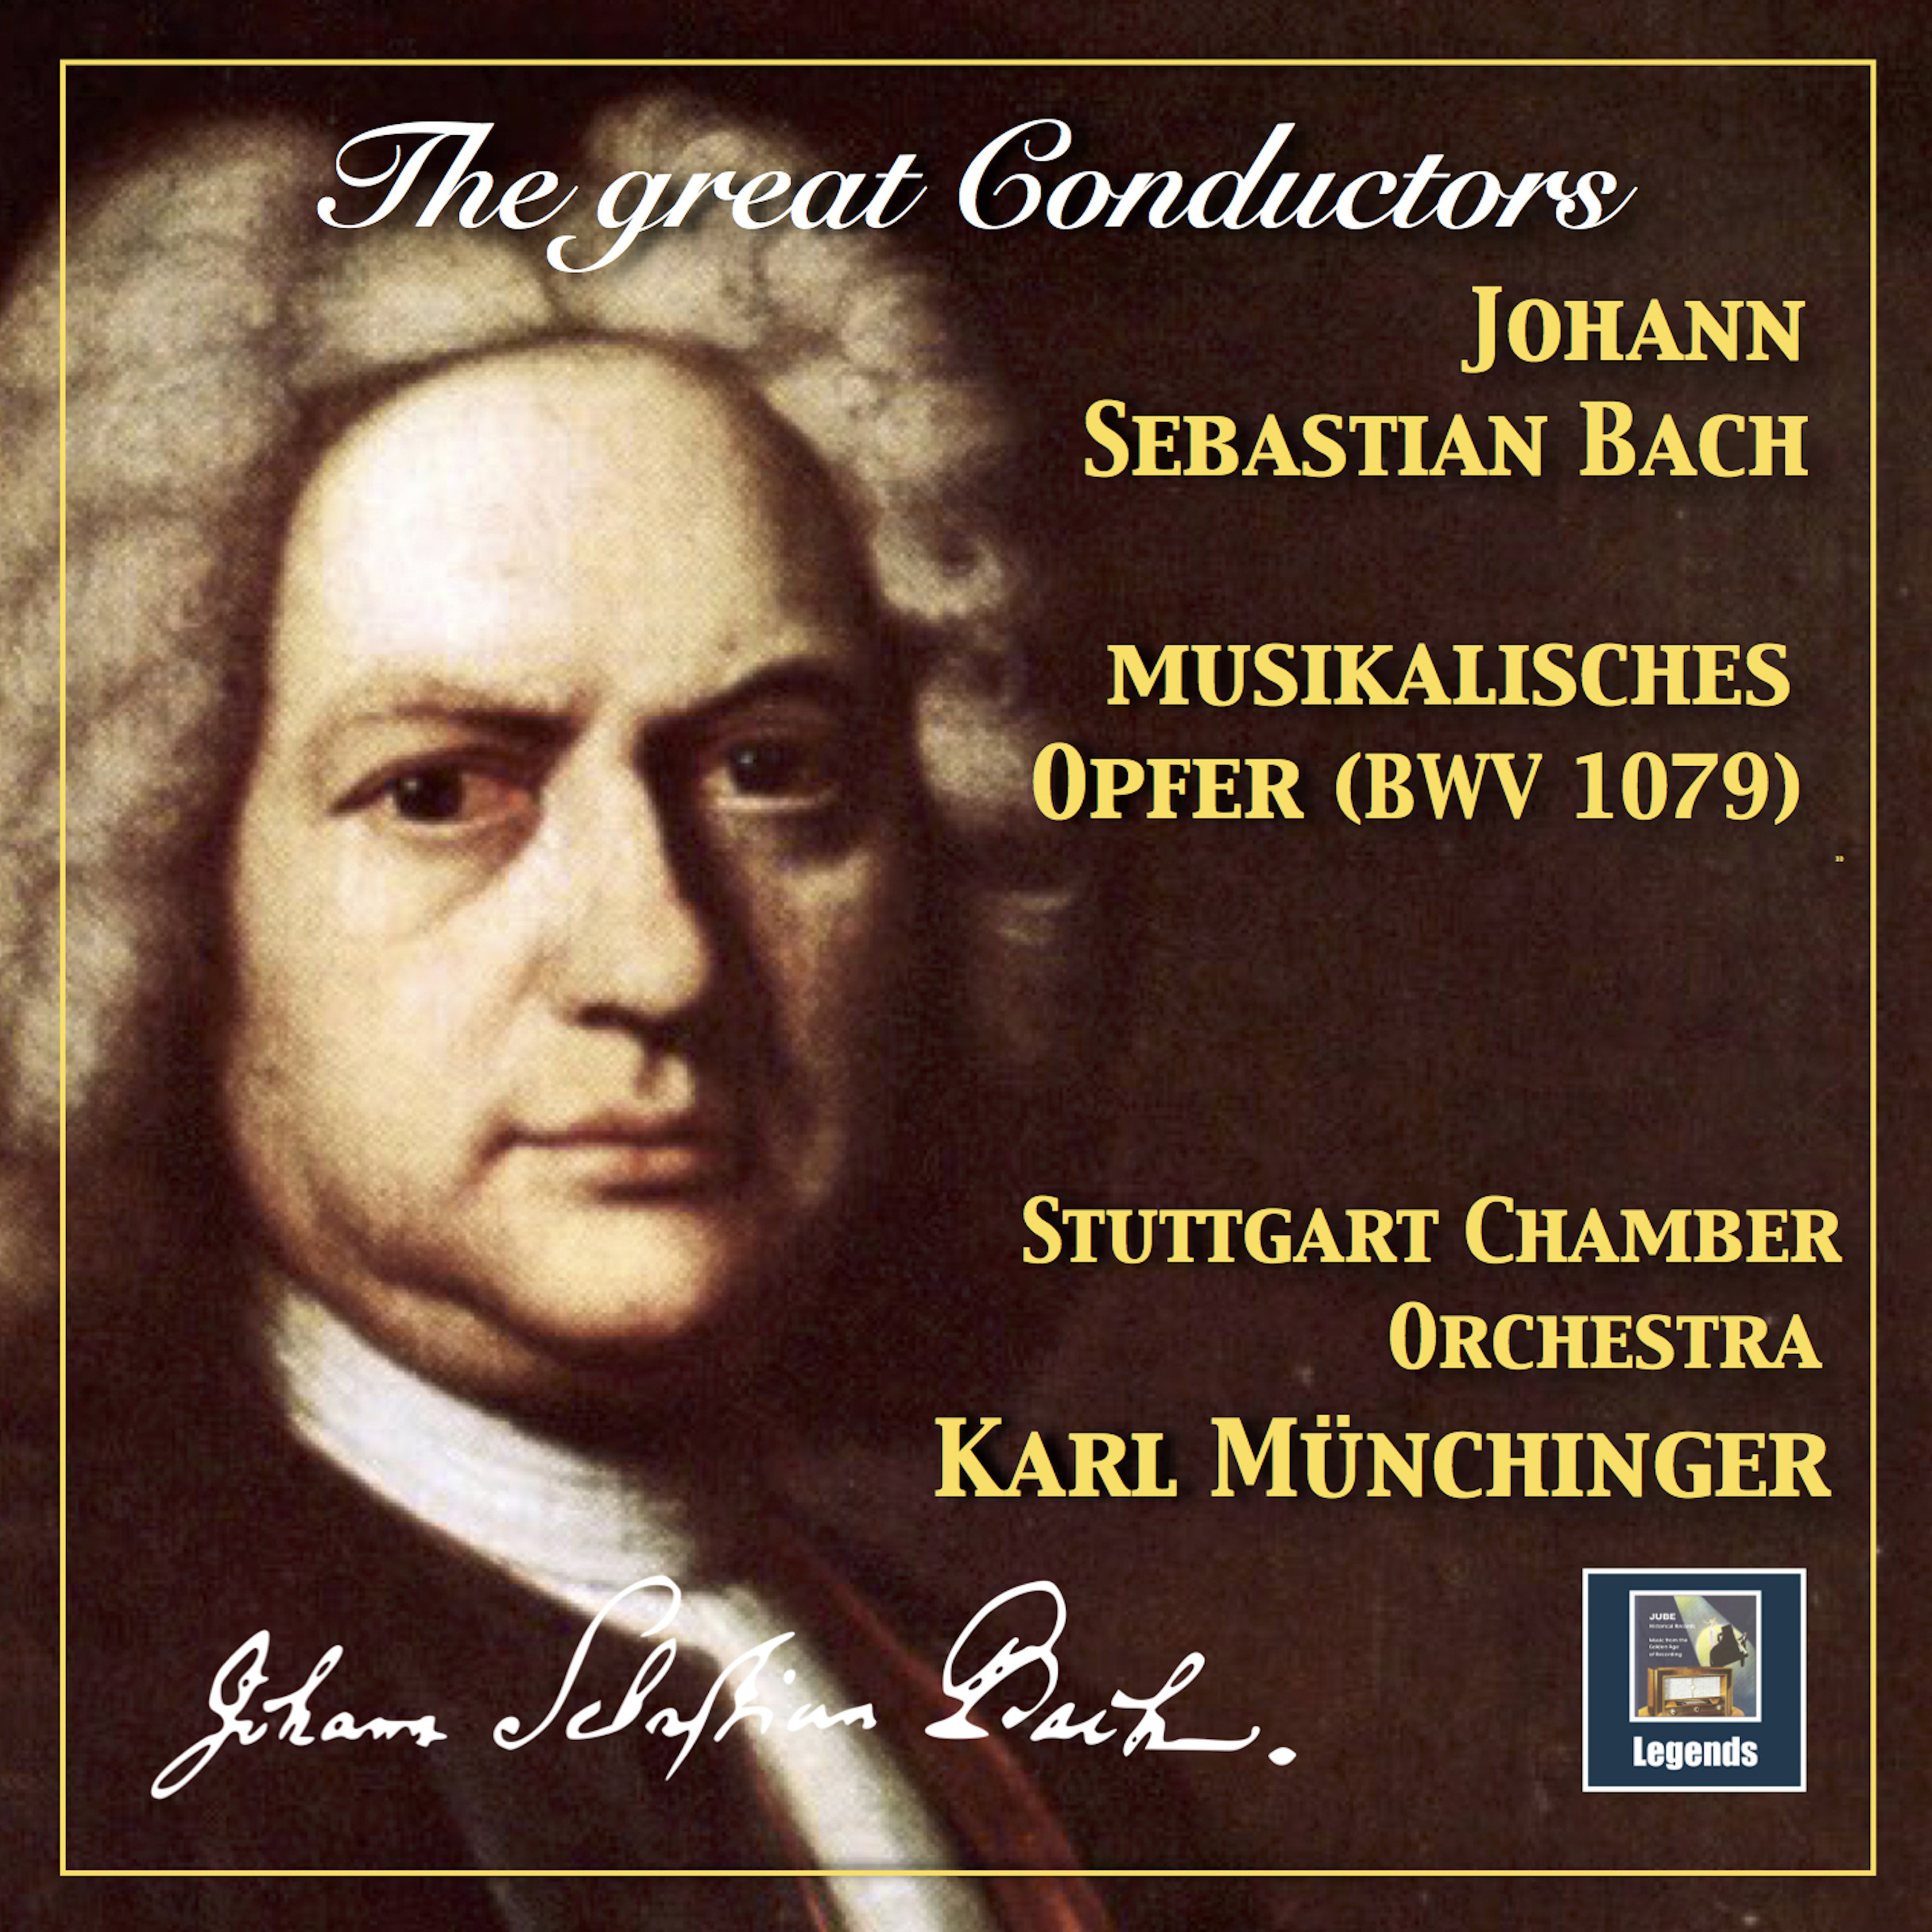 Musikalisches Opfer, BWV 1079 Arr. K. Mü nchinger for Chamber Orchestra: Canon perpetuus a 2